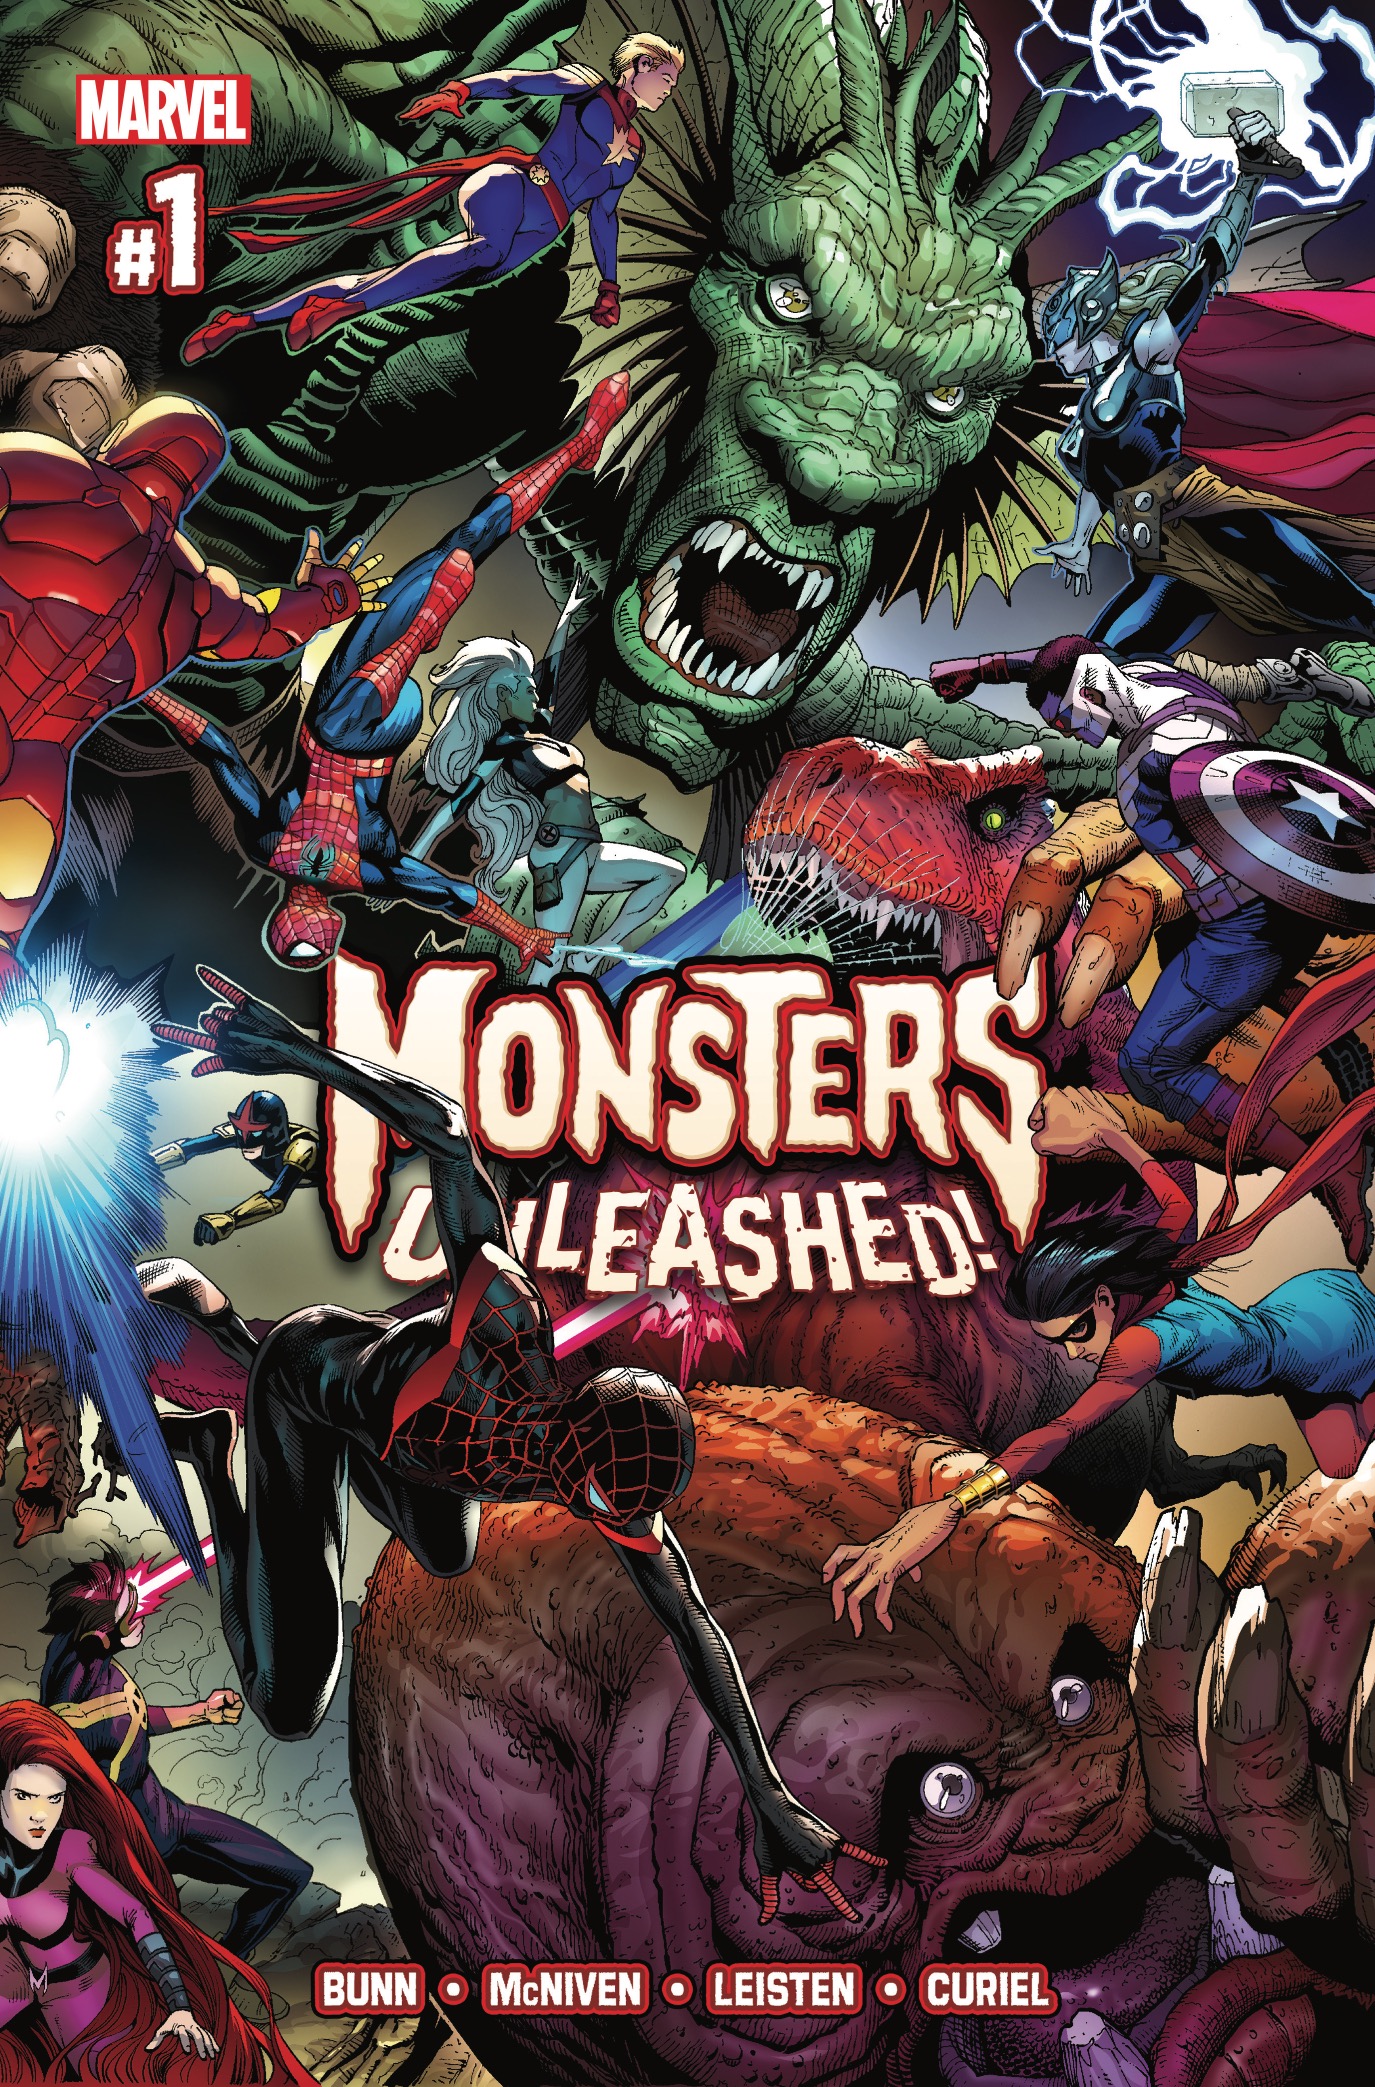 Monsters Unleashed #1 Review